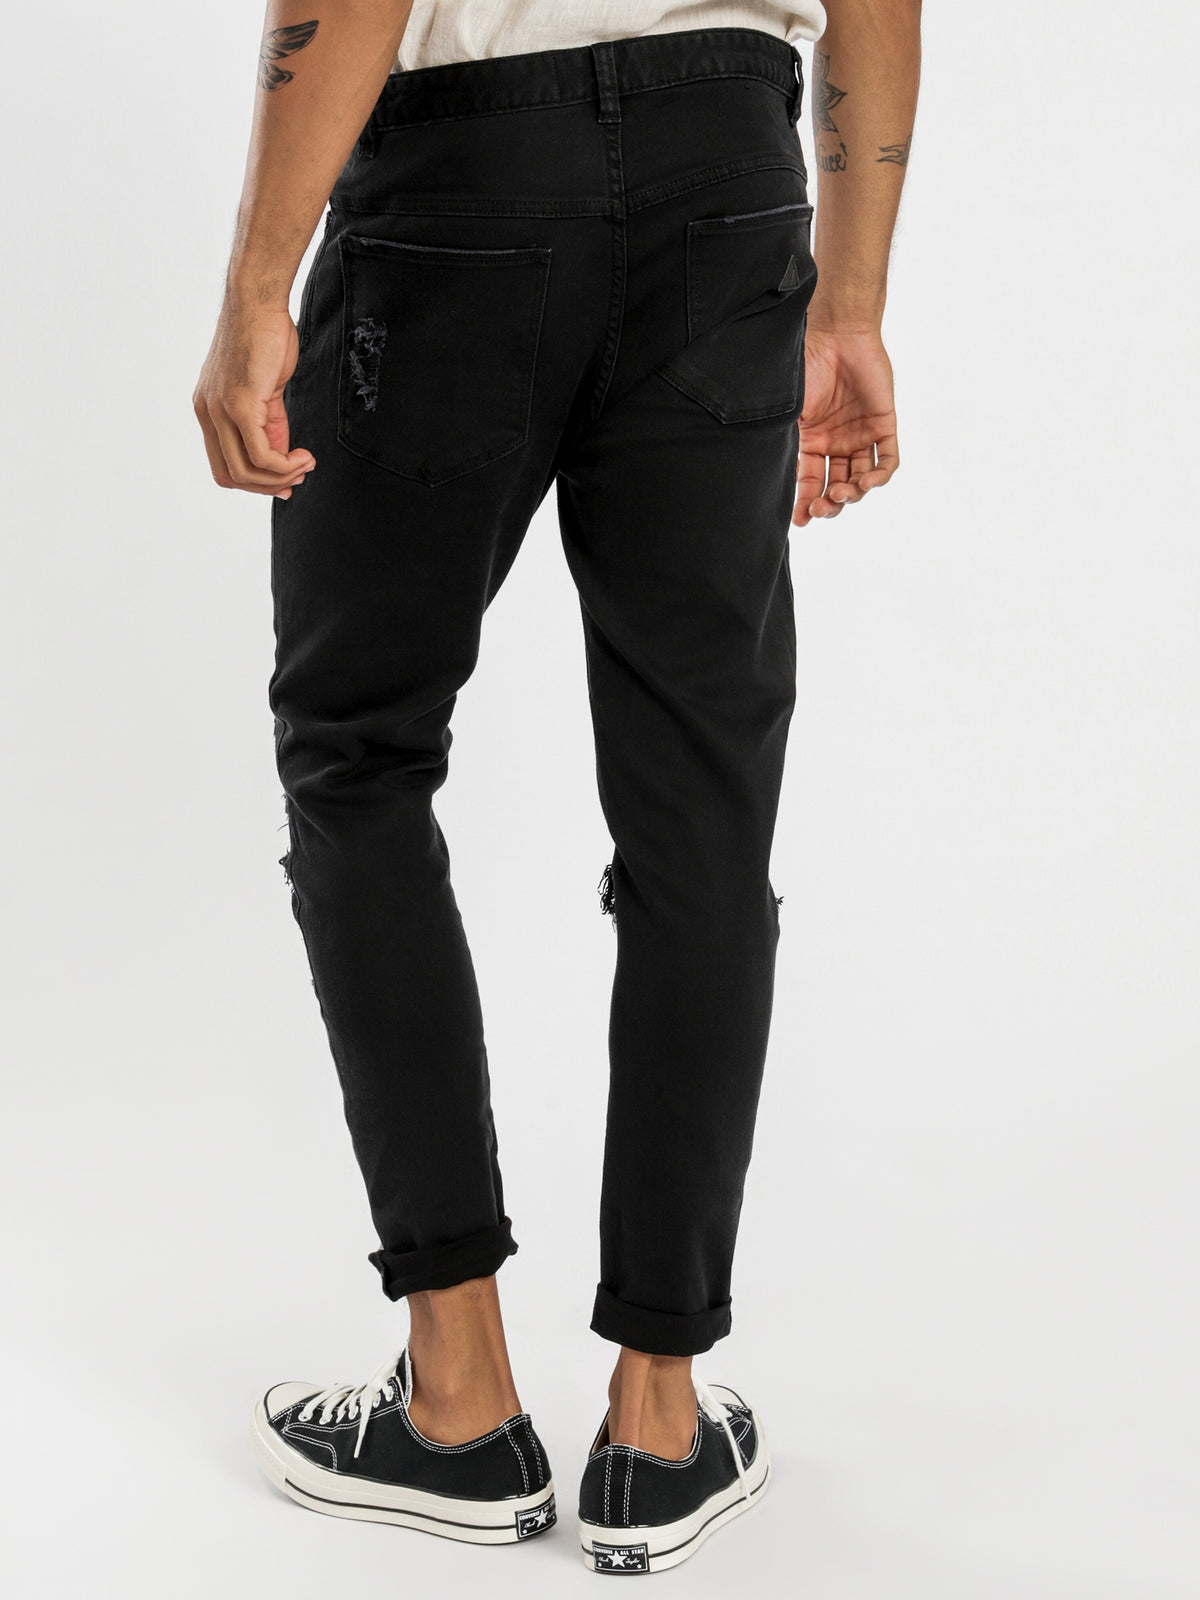 A Dropped Slim Turn Up Jeans Rogue Black